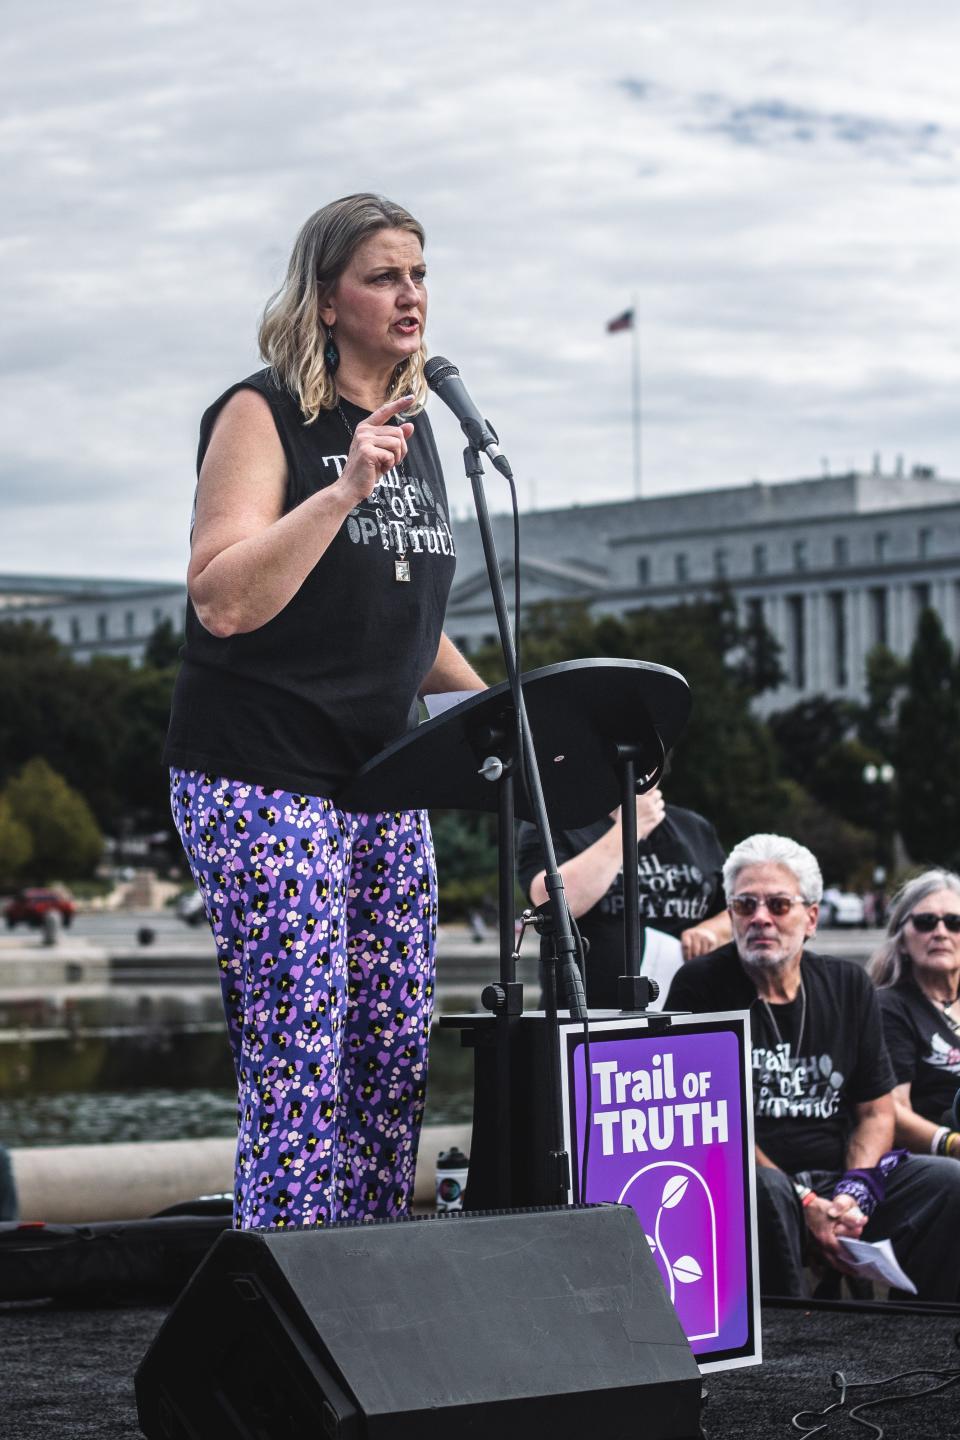 Alexis Pleus of Windsor, New York, lost her son, Jeff Dugon, to an accidental heroin overdose. After his death, she formed Truth Pharm, which advocates for people struggling with substance abuse.